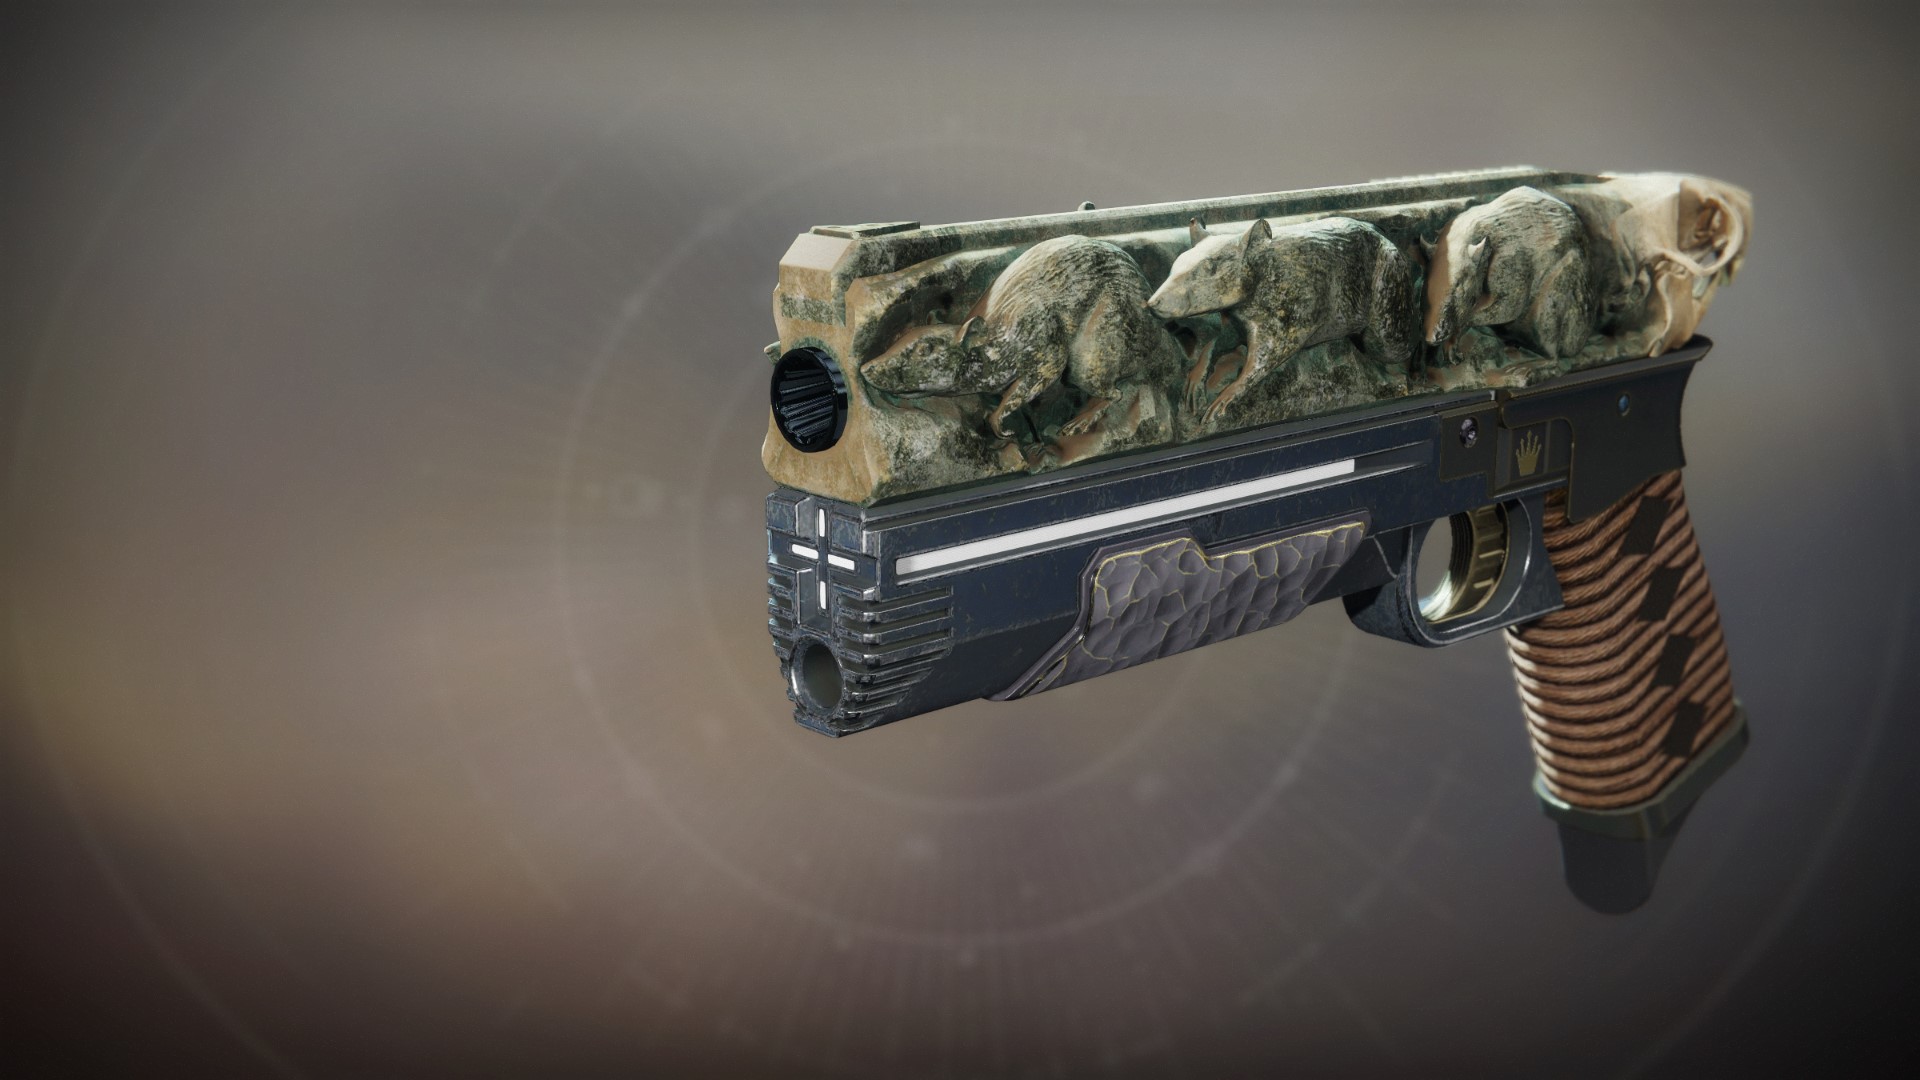 Catacombs - Destiny 2 Exotic Weapon Ornament - light.gg